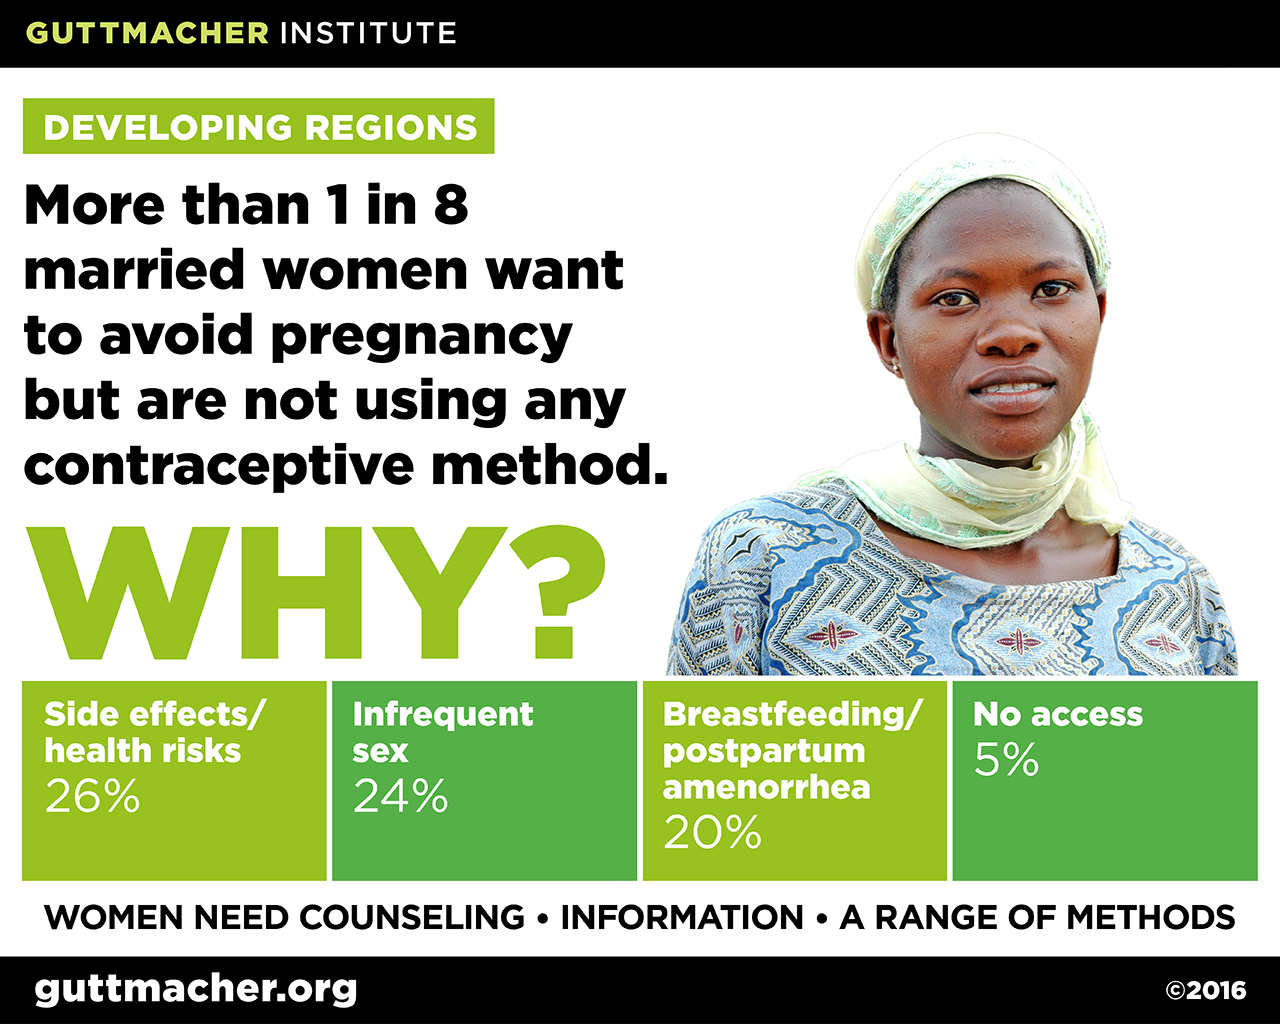 More than 1 in 8 married women want to avoid pregnancy but are not using any contraceptive method